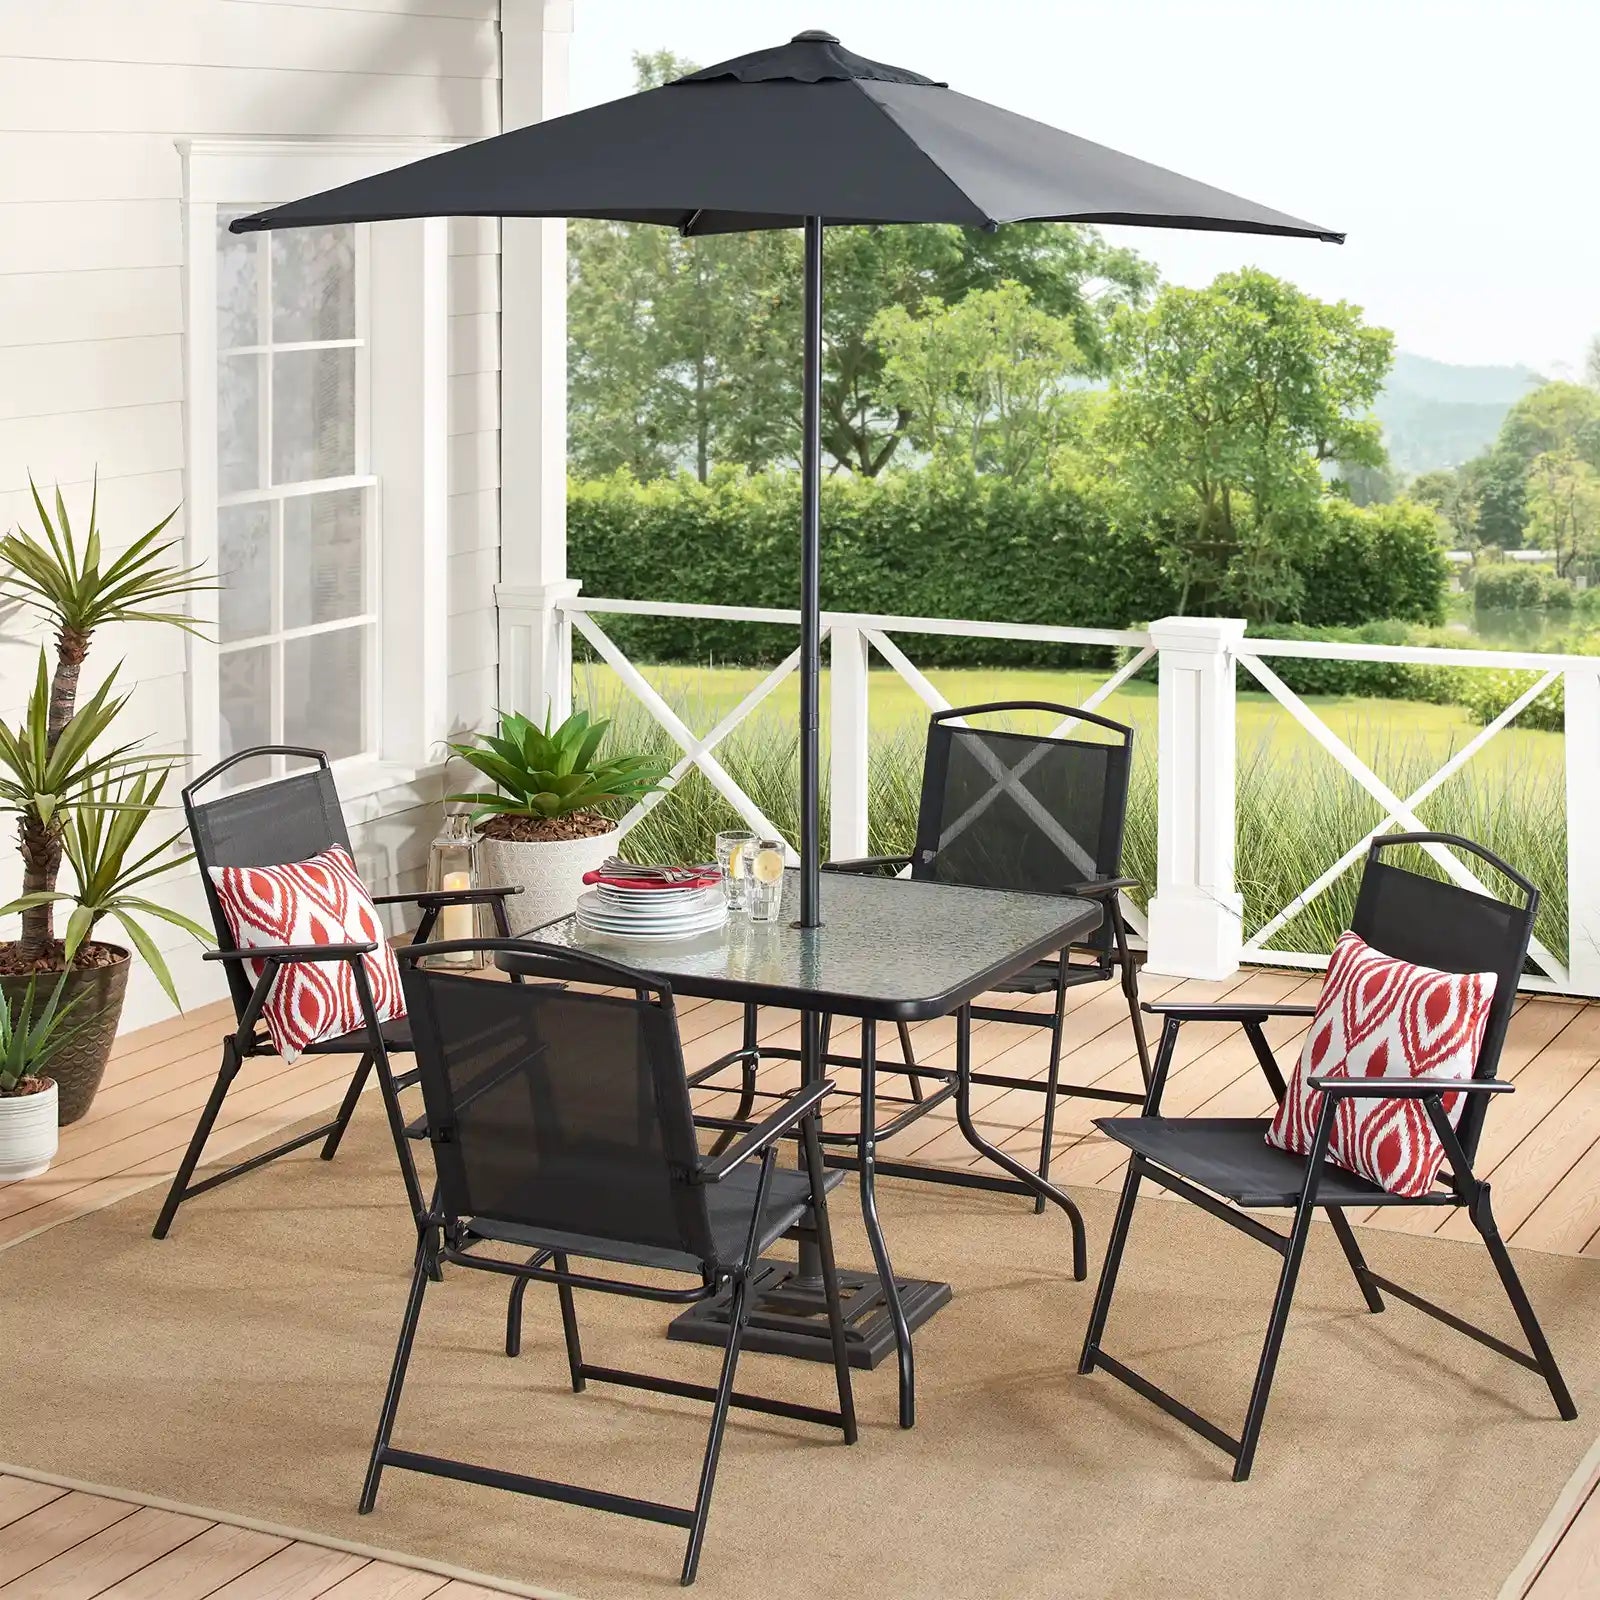 Outdoor Patio Dining Set, Dining Table ,Chairs and Umbrella